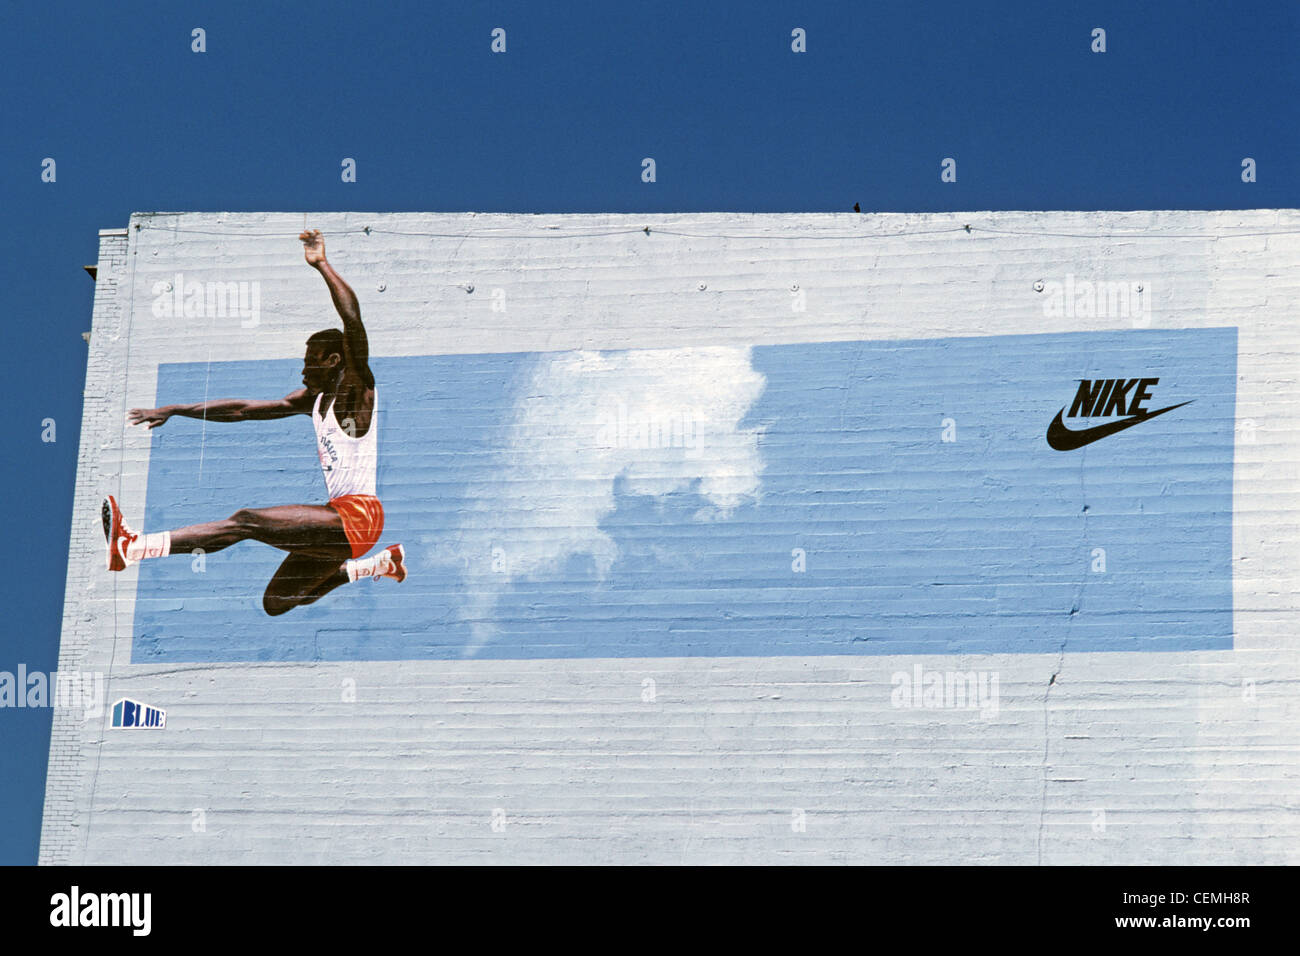 Retro image of Nike Ad Carl Lewis iconic athlete doing his long jump side  of building painted mural Stock Photo - Alamy